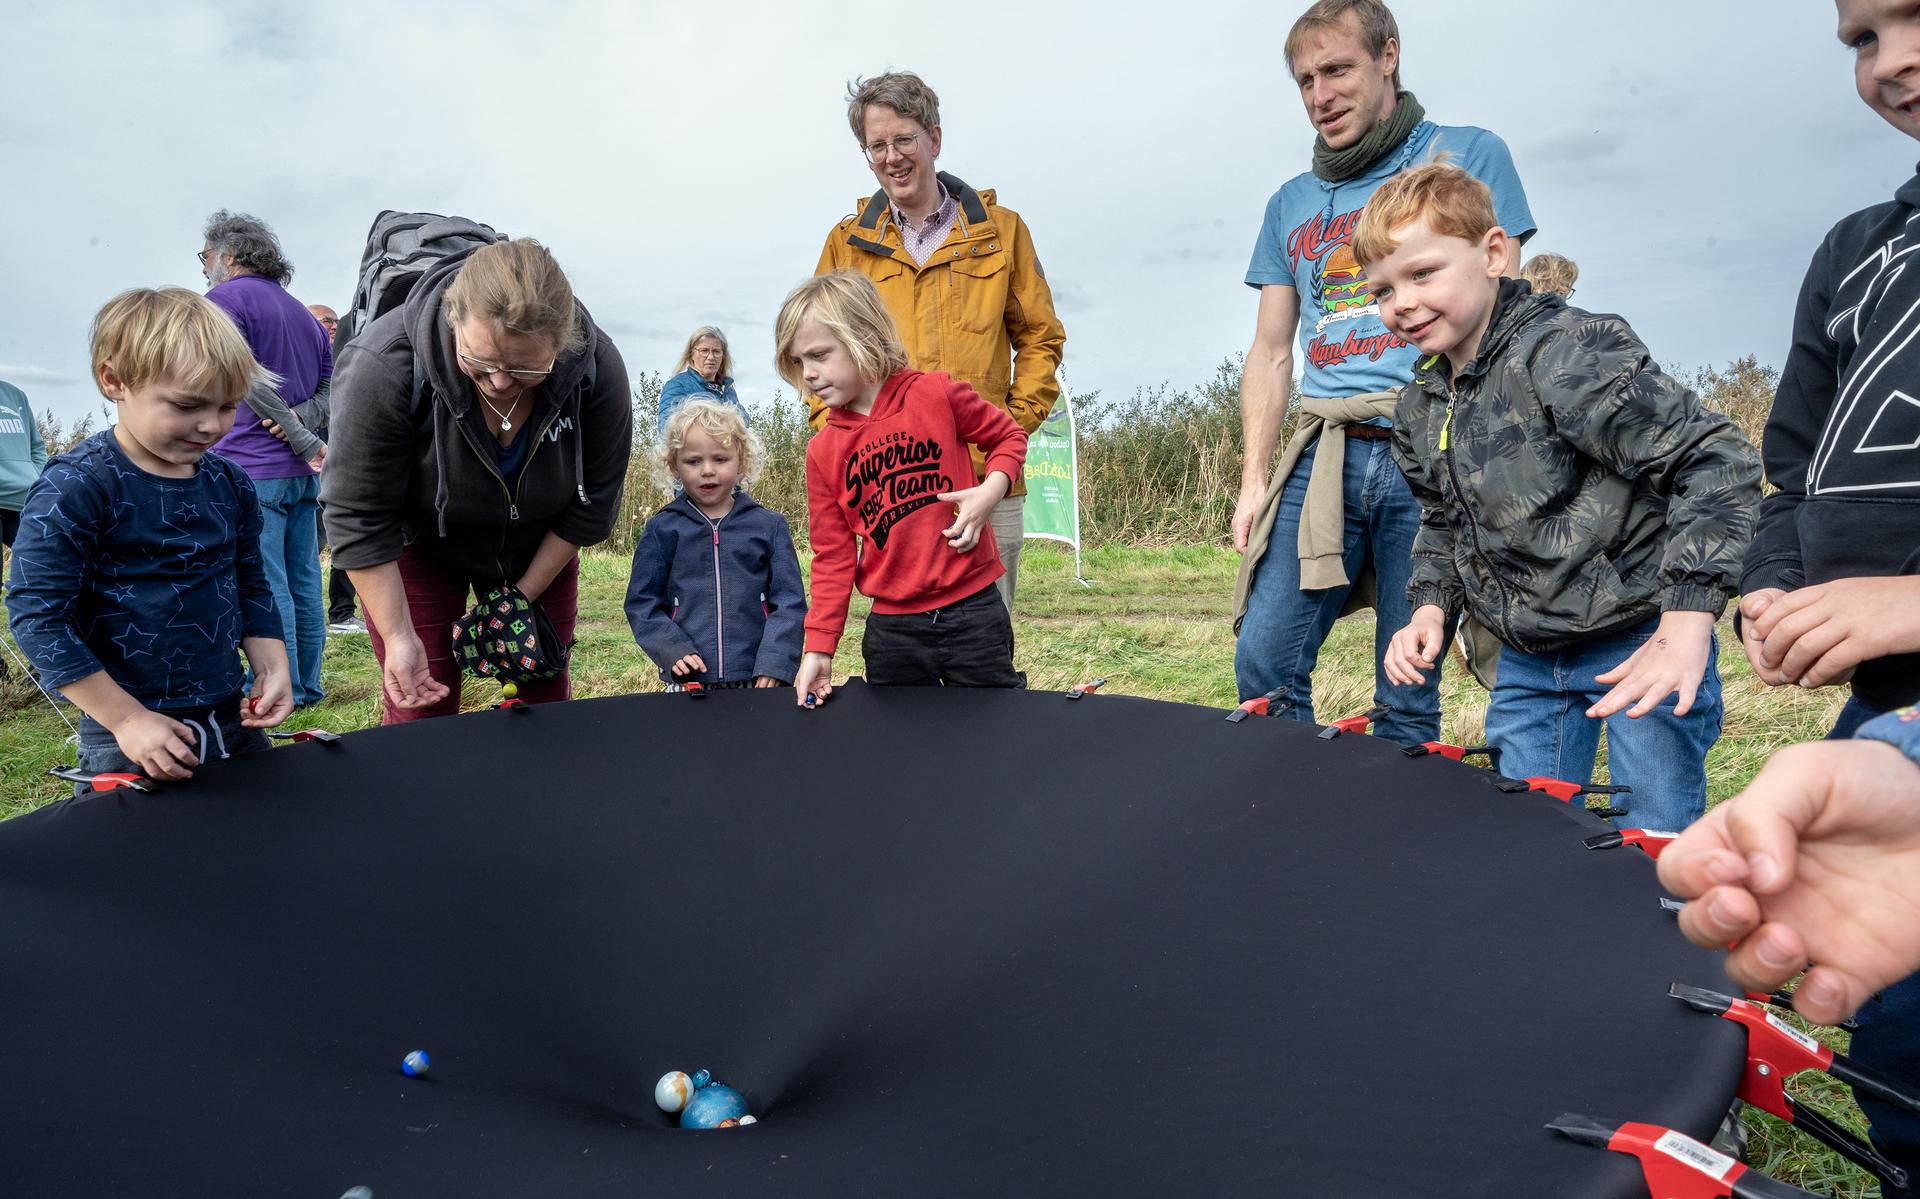 Learn about nature and astronomy at the Lofar Radio Telescope in Exloo during the Science Weekend.  “Technology and science are available to everyone at all levels.”